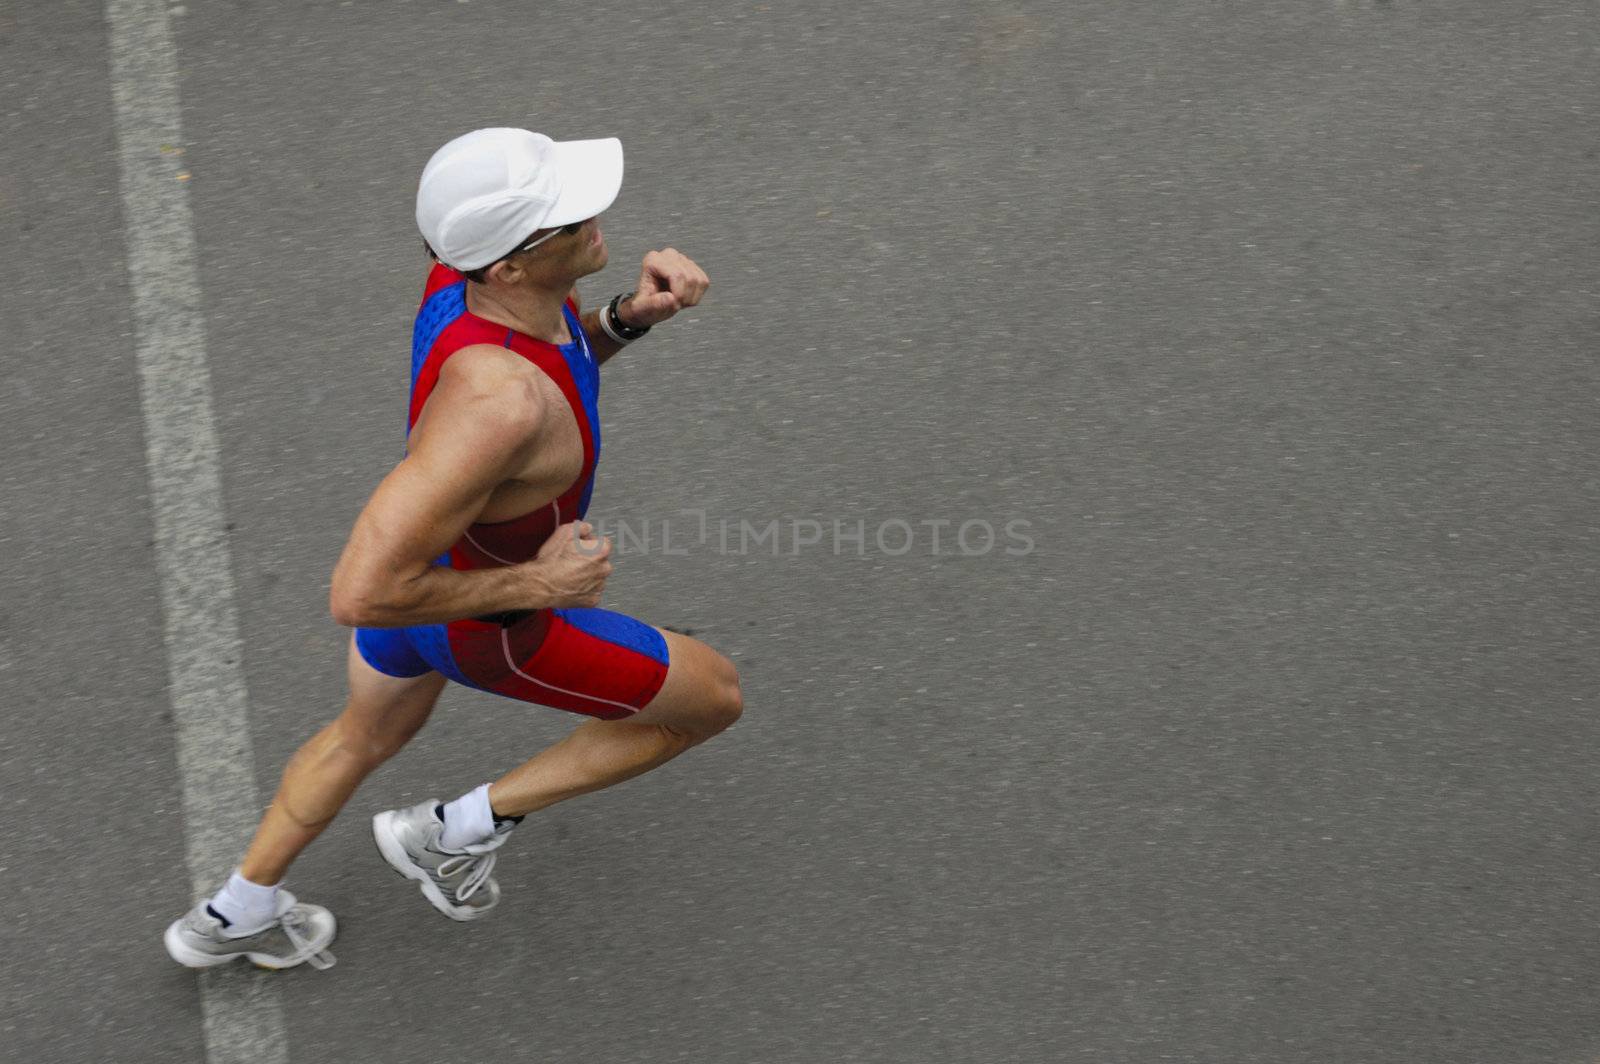 A marathon runner crossing a line, taken from above. Motion blur on his feet. Space for text on the tarmac in front of him.